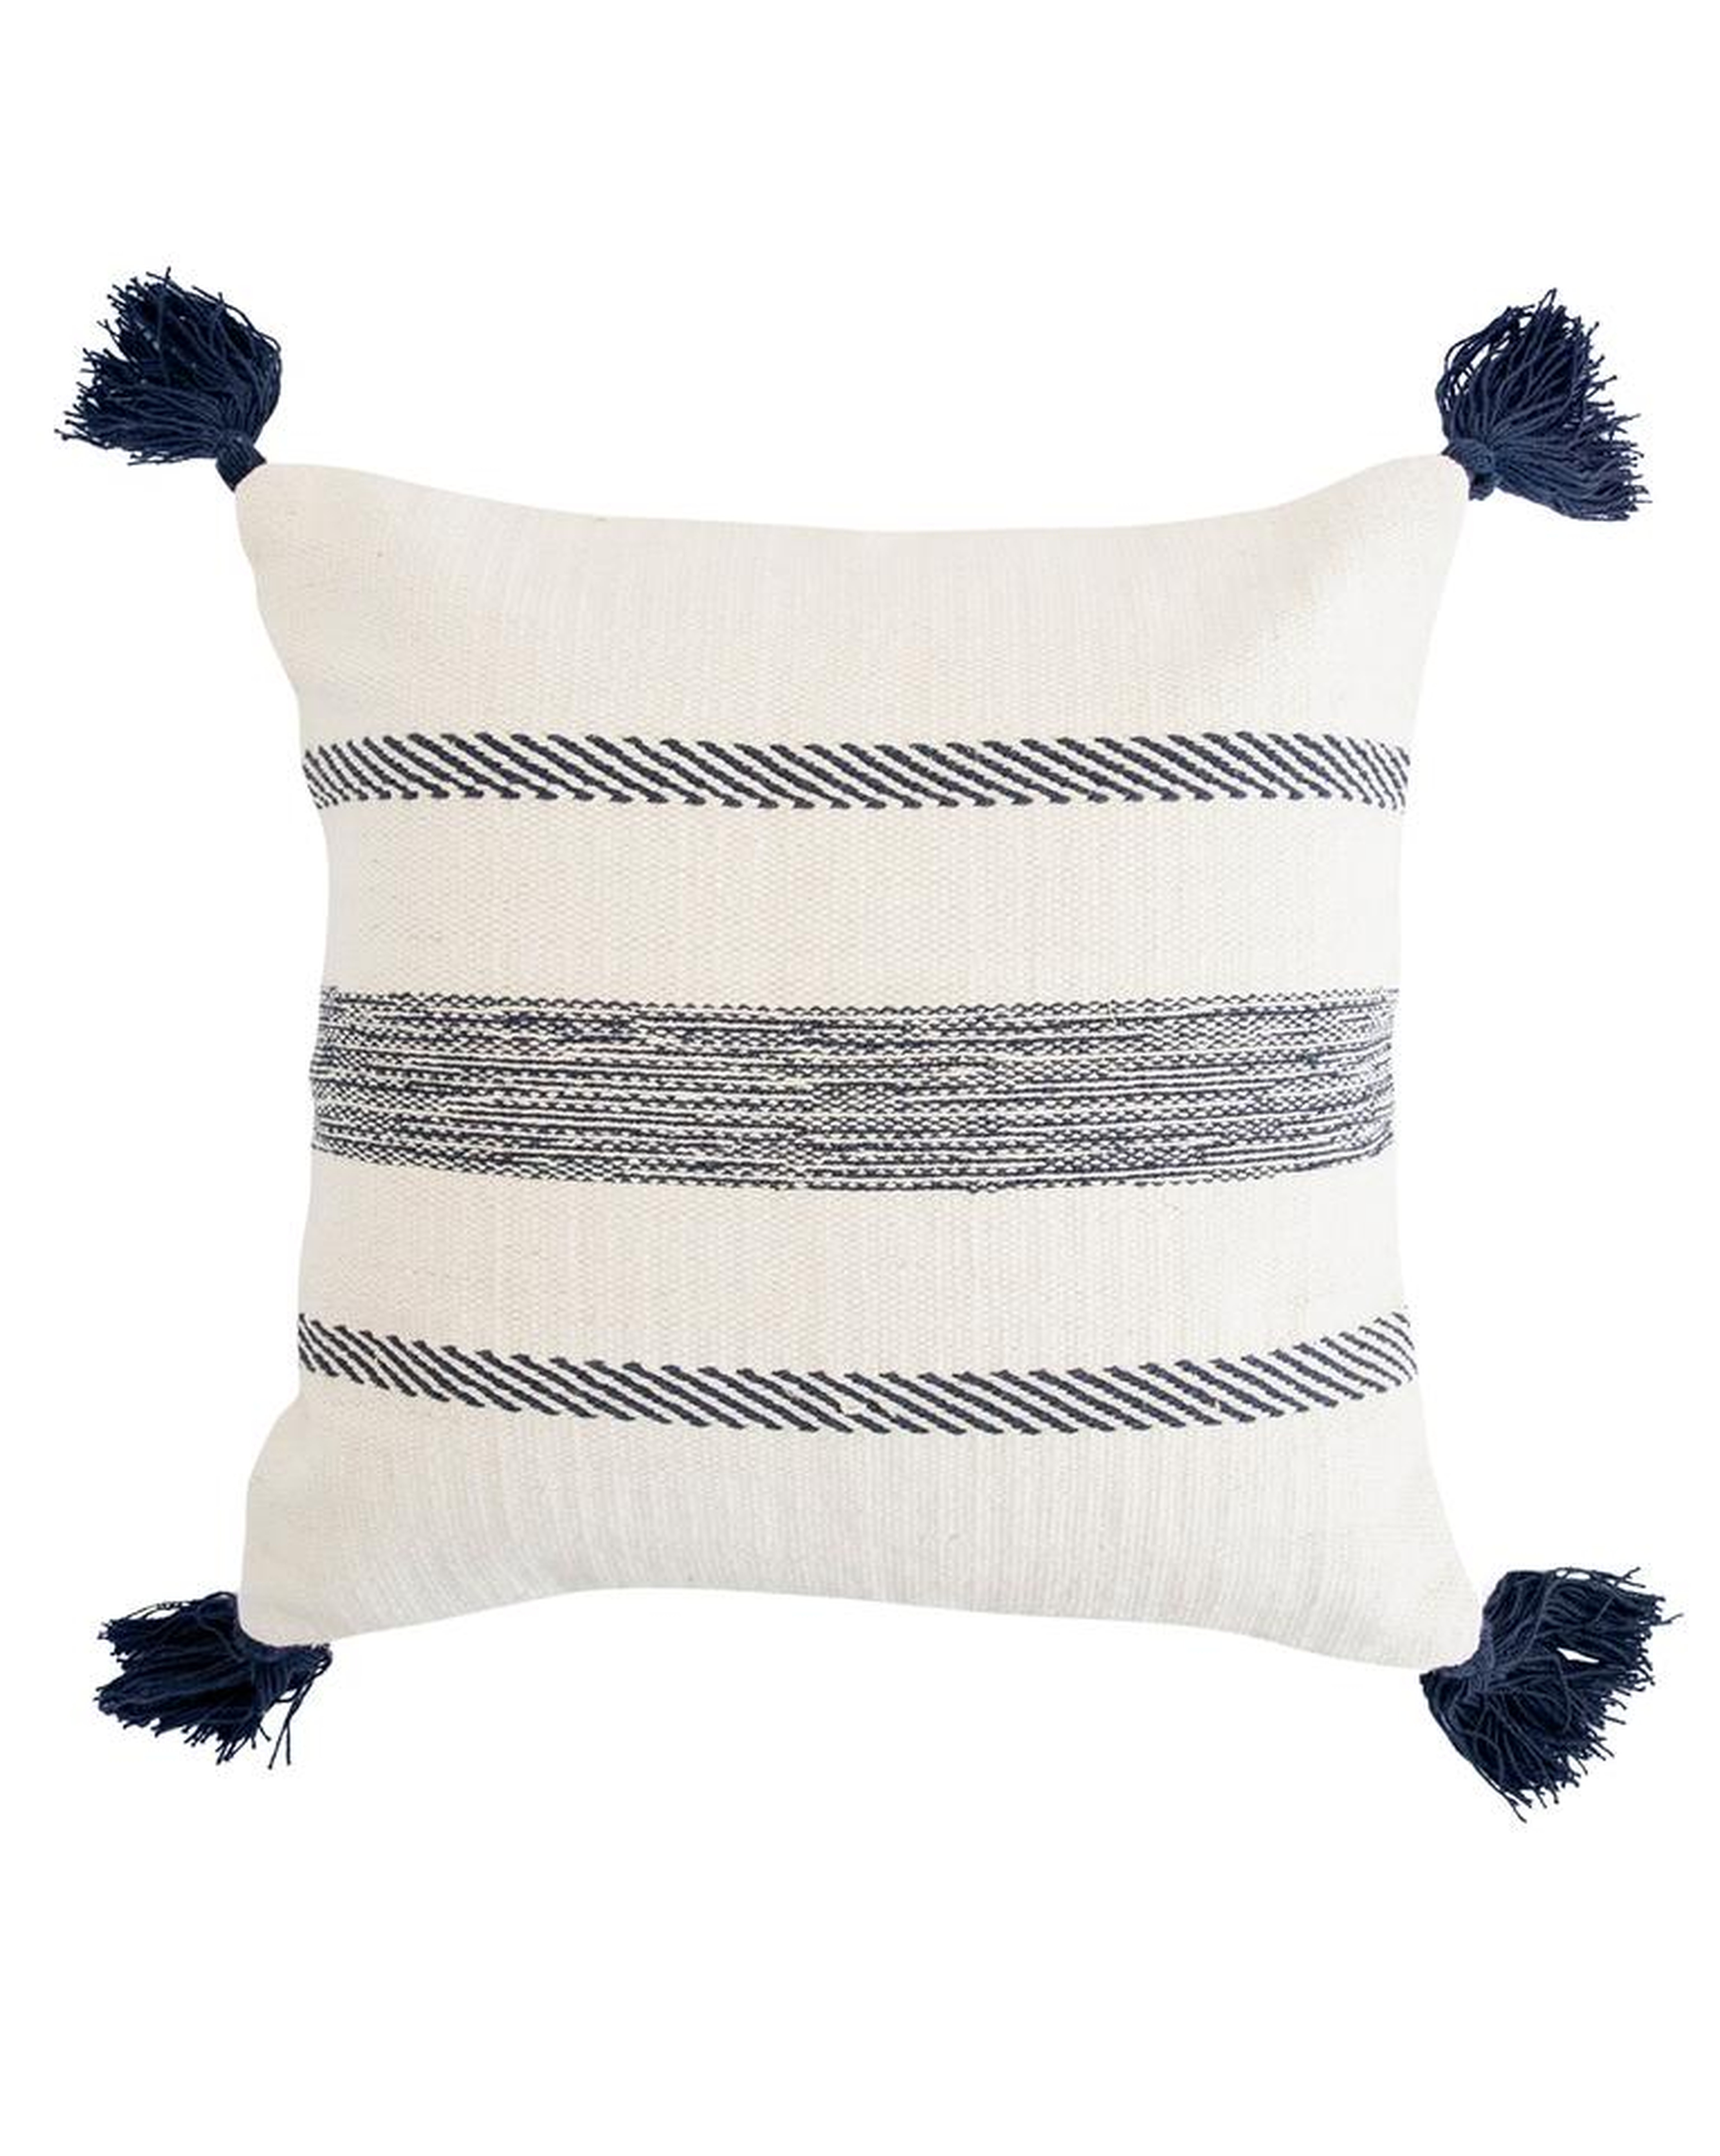 MONI PILLOW WITHOUT INSERT, 18" x 18" - McGee & Co.